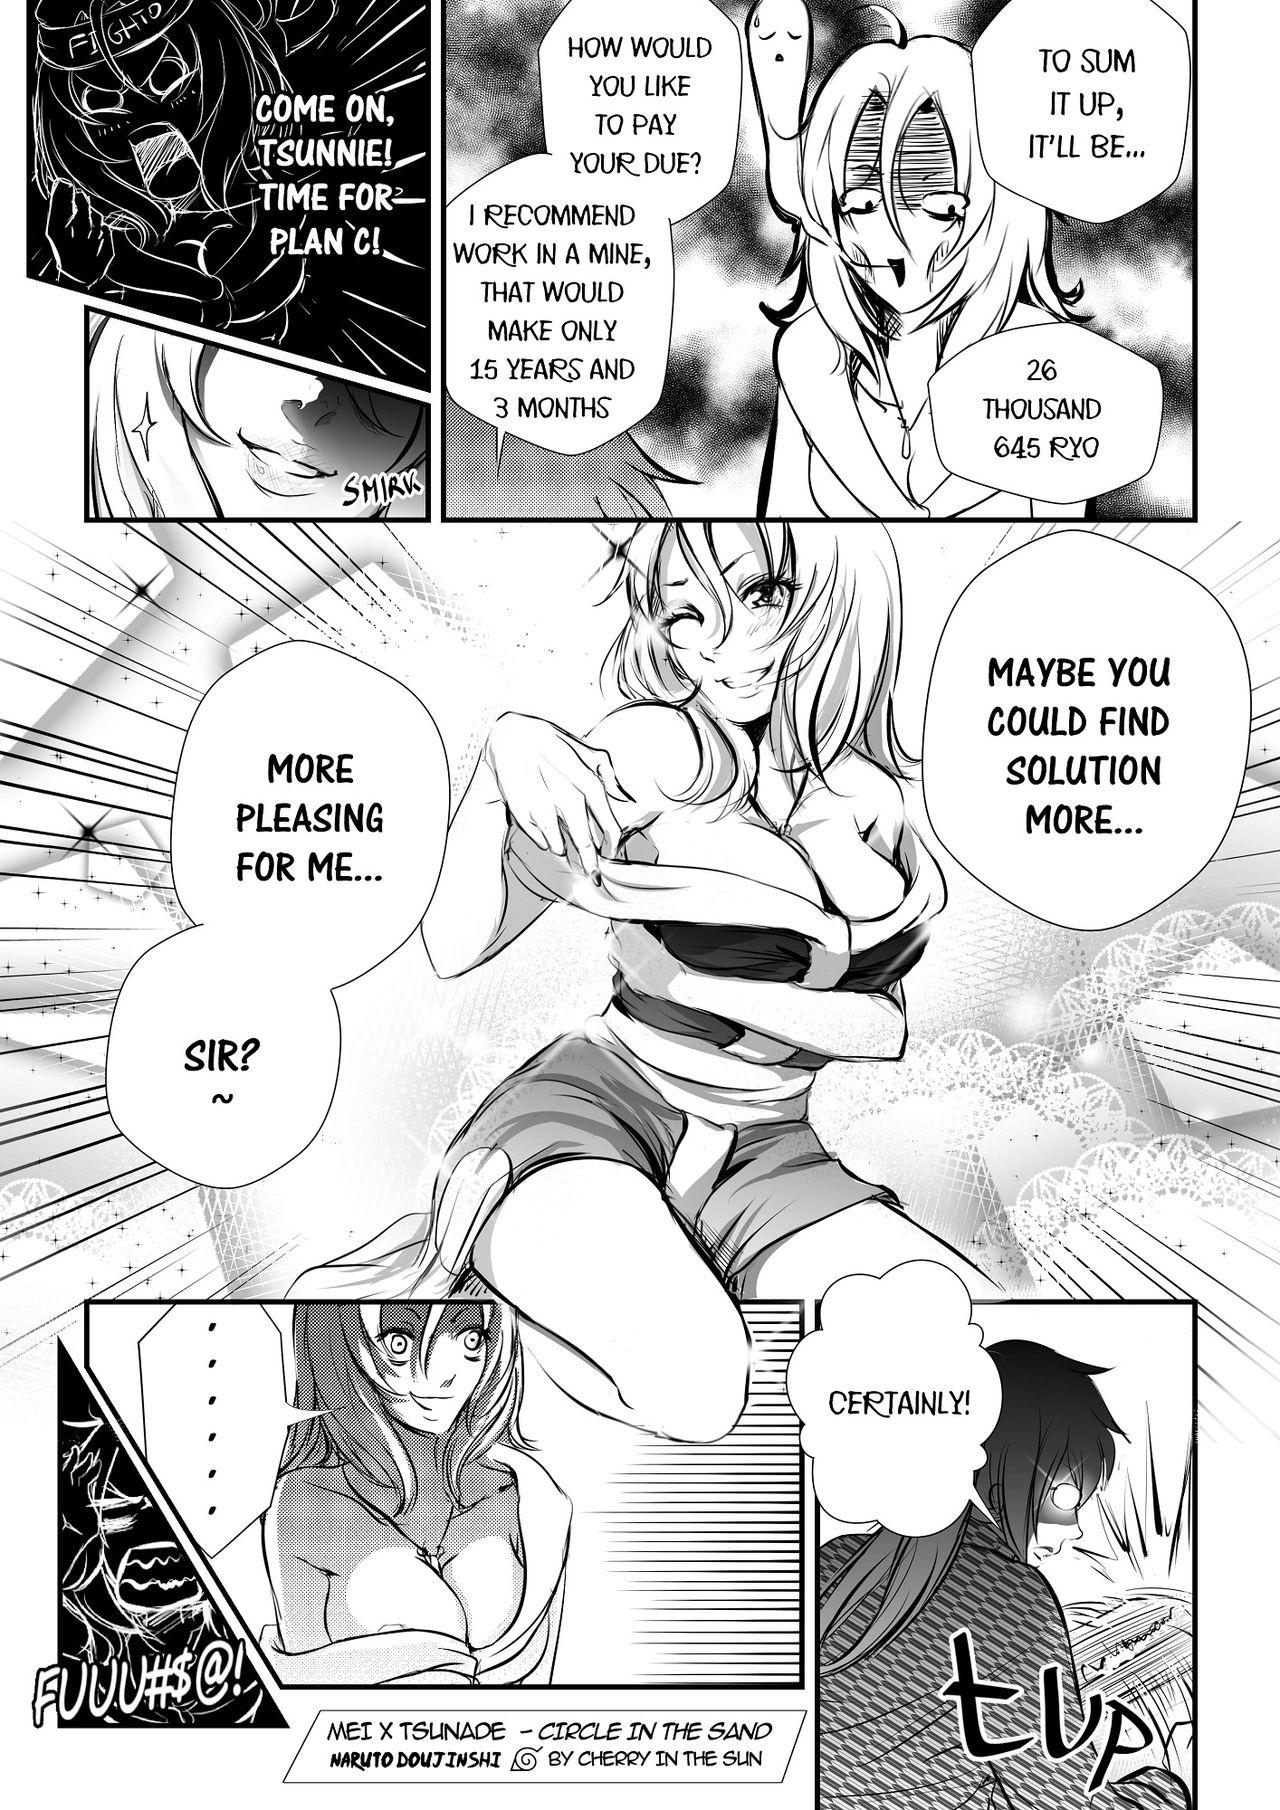 Hotporn Circle in the Sand - Naruto Seduction - Page 12